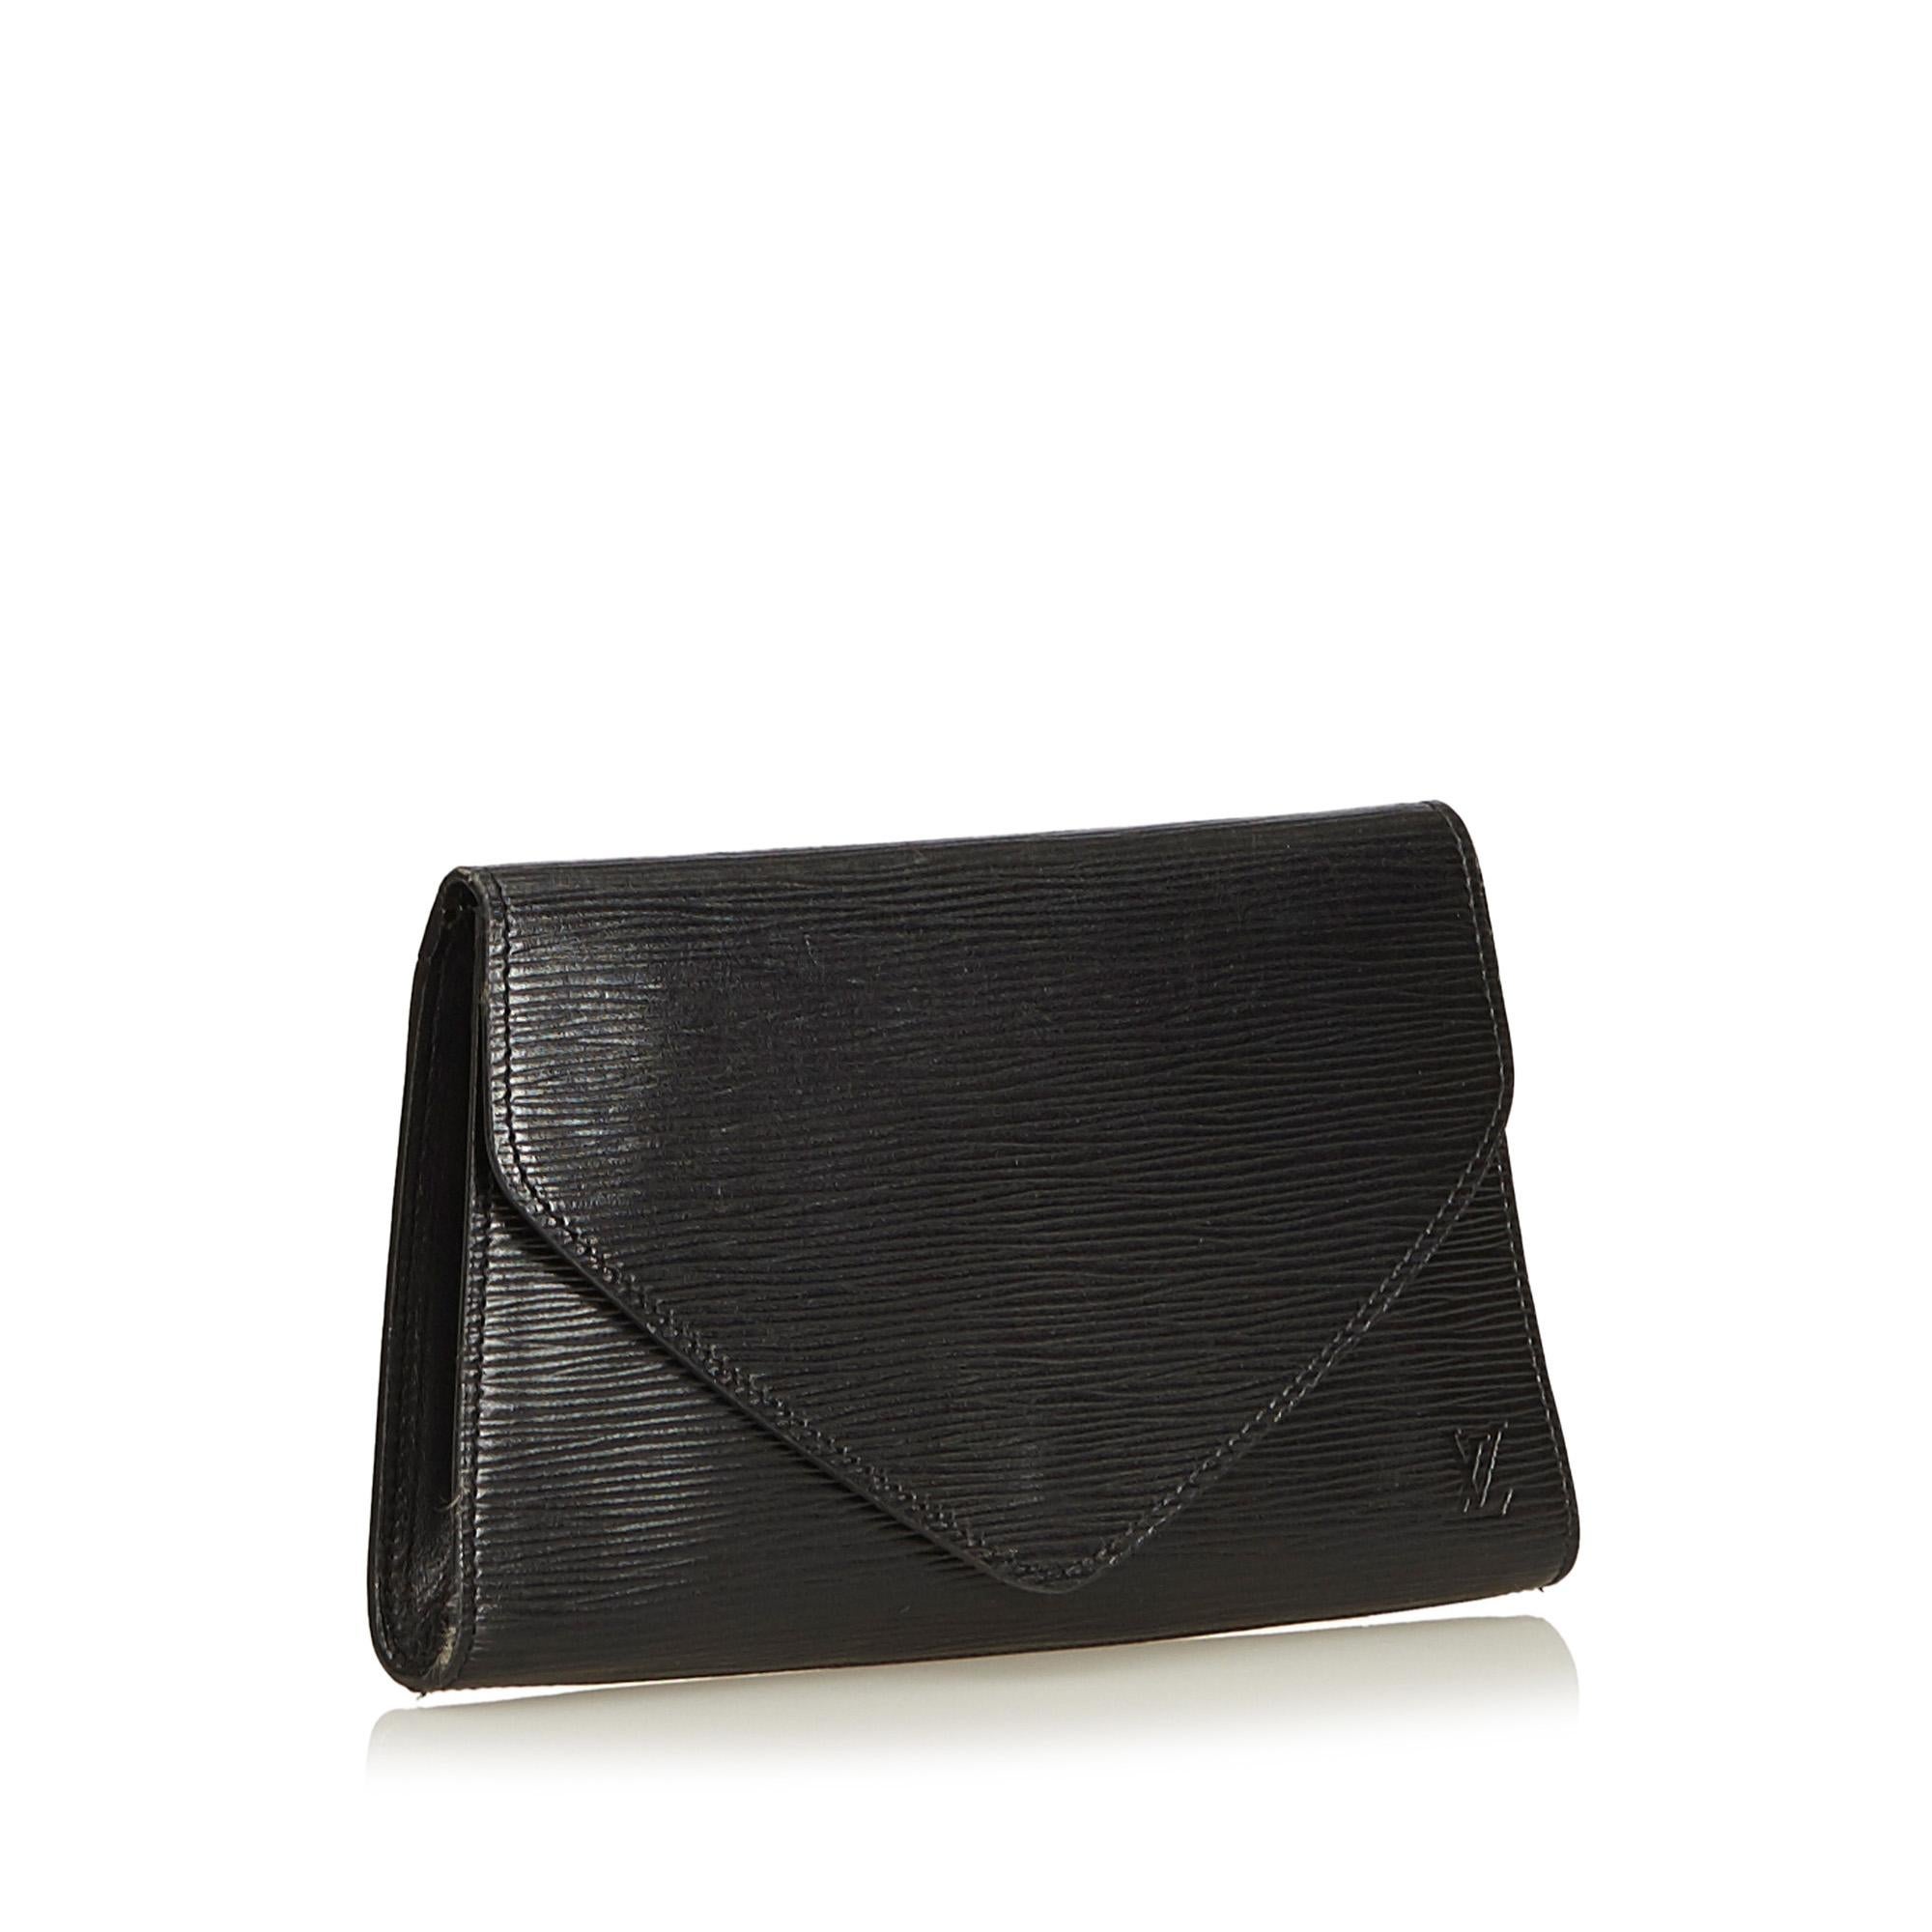 The Louis Vuitton Art Deco Clutch is an envelope clutch and features a black epi leather body, front flap with snap closure, single exterior back pocket, and an interior slip pocket. 

Serial number: 881VI